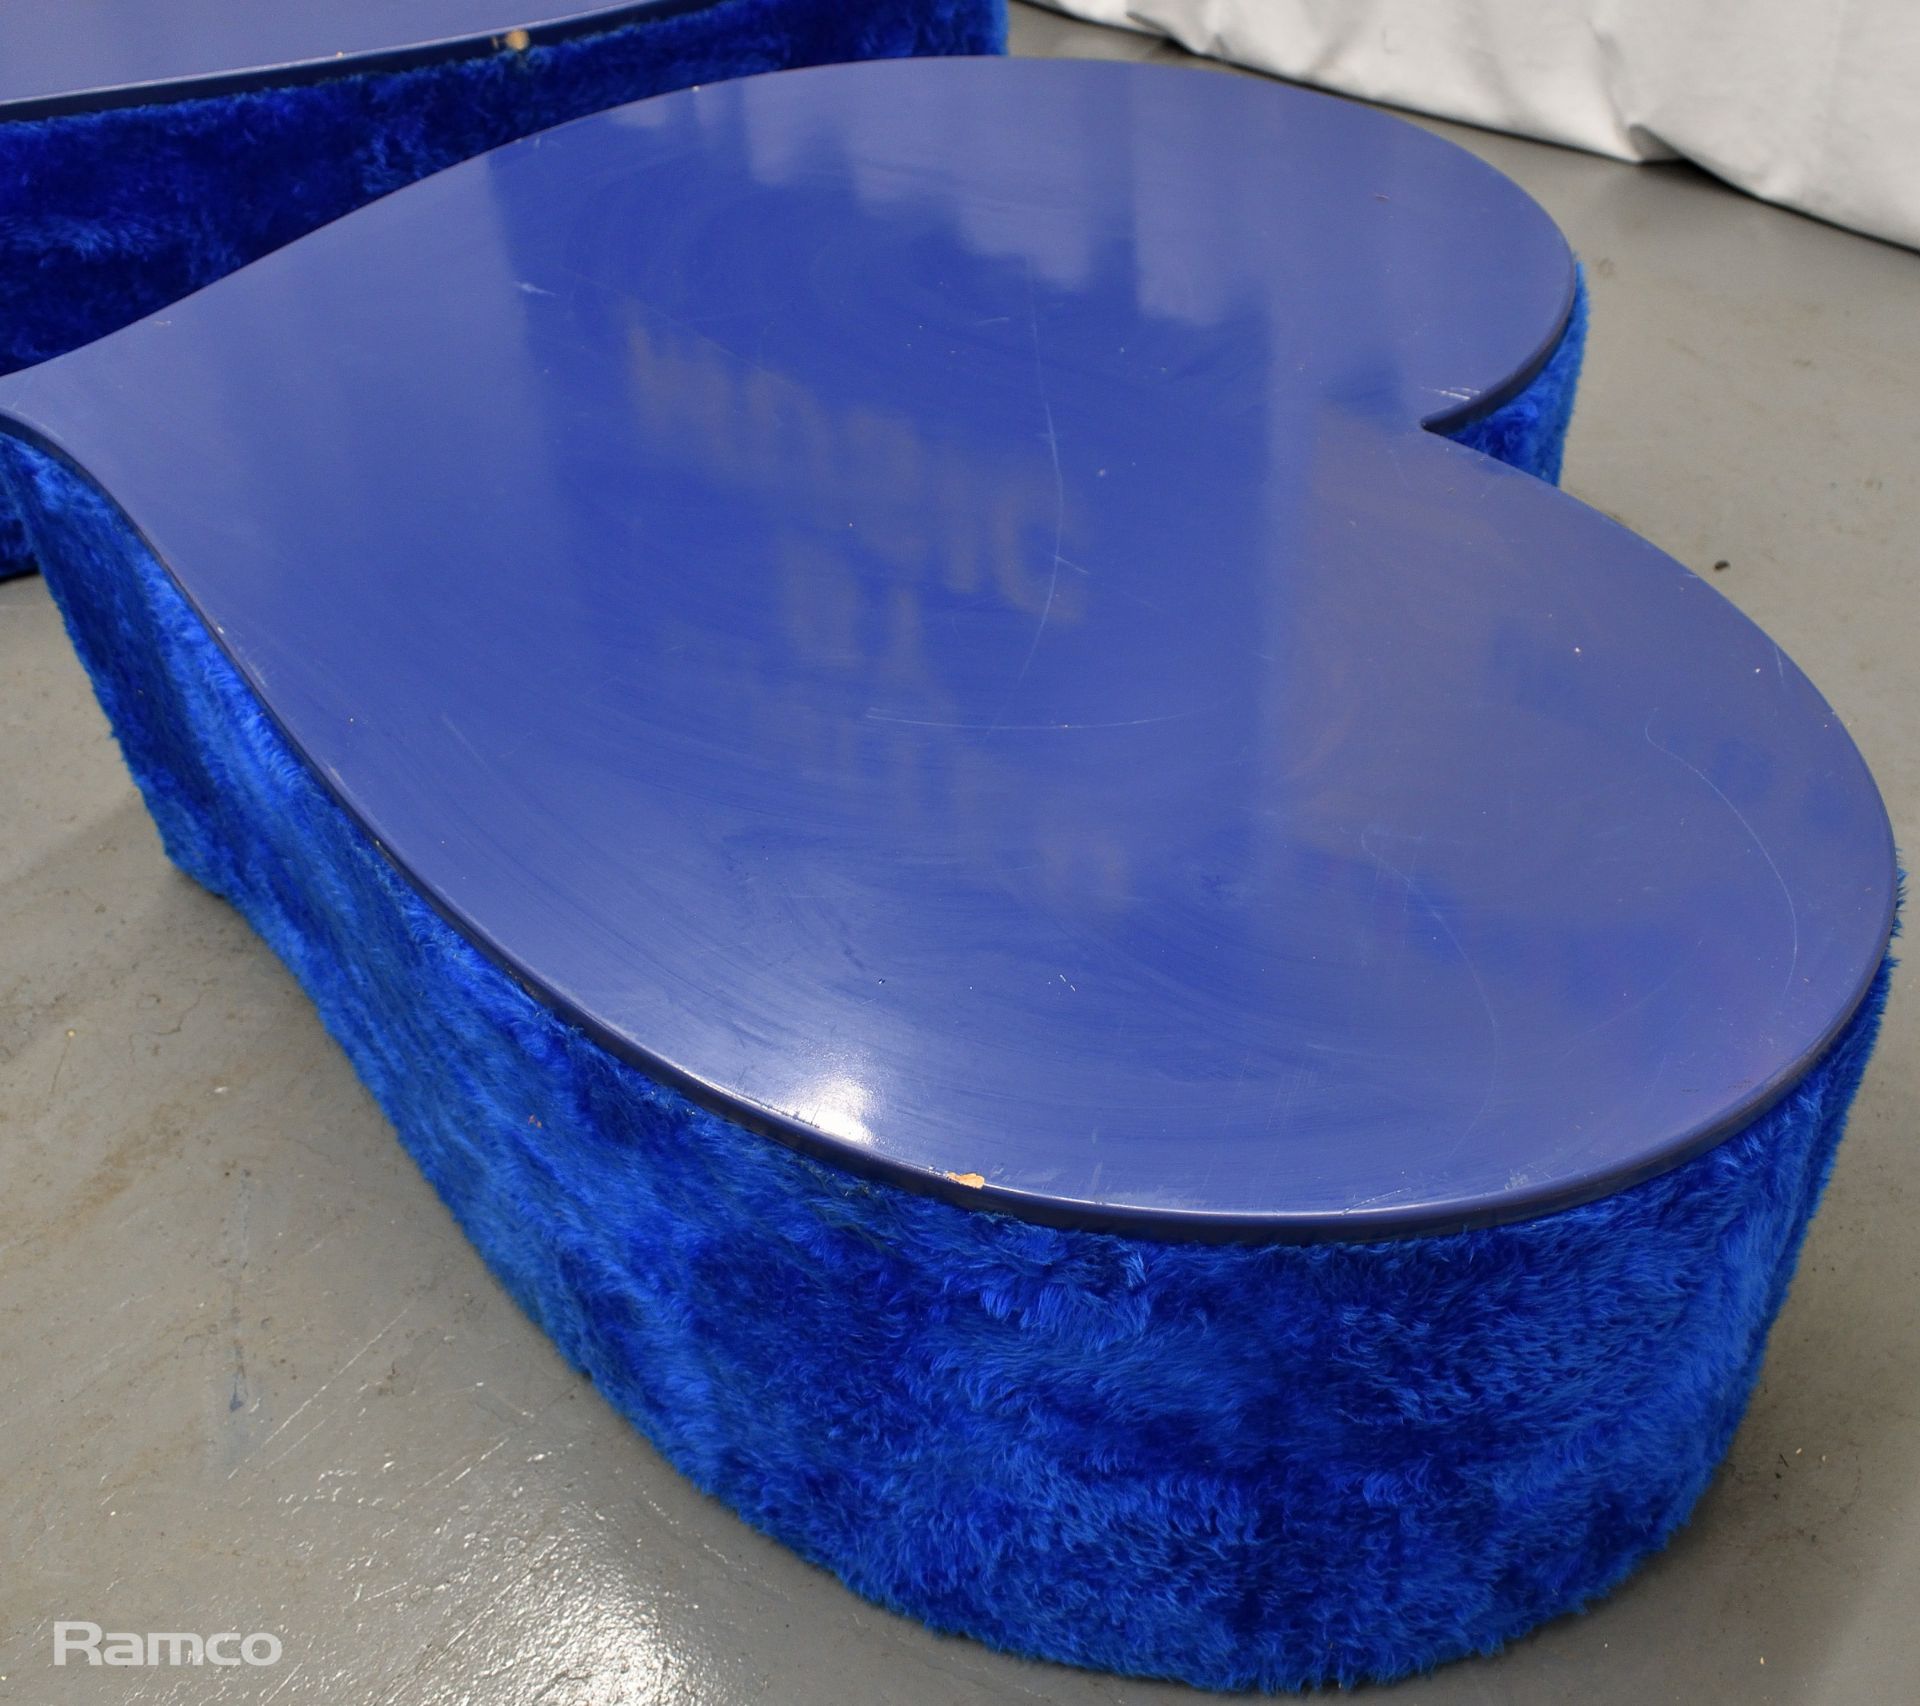 3x Asymmetrical heart shaped blue fur-covered wooden tables from countries' seating area - Image 10 of 13